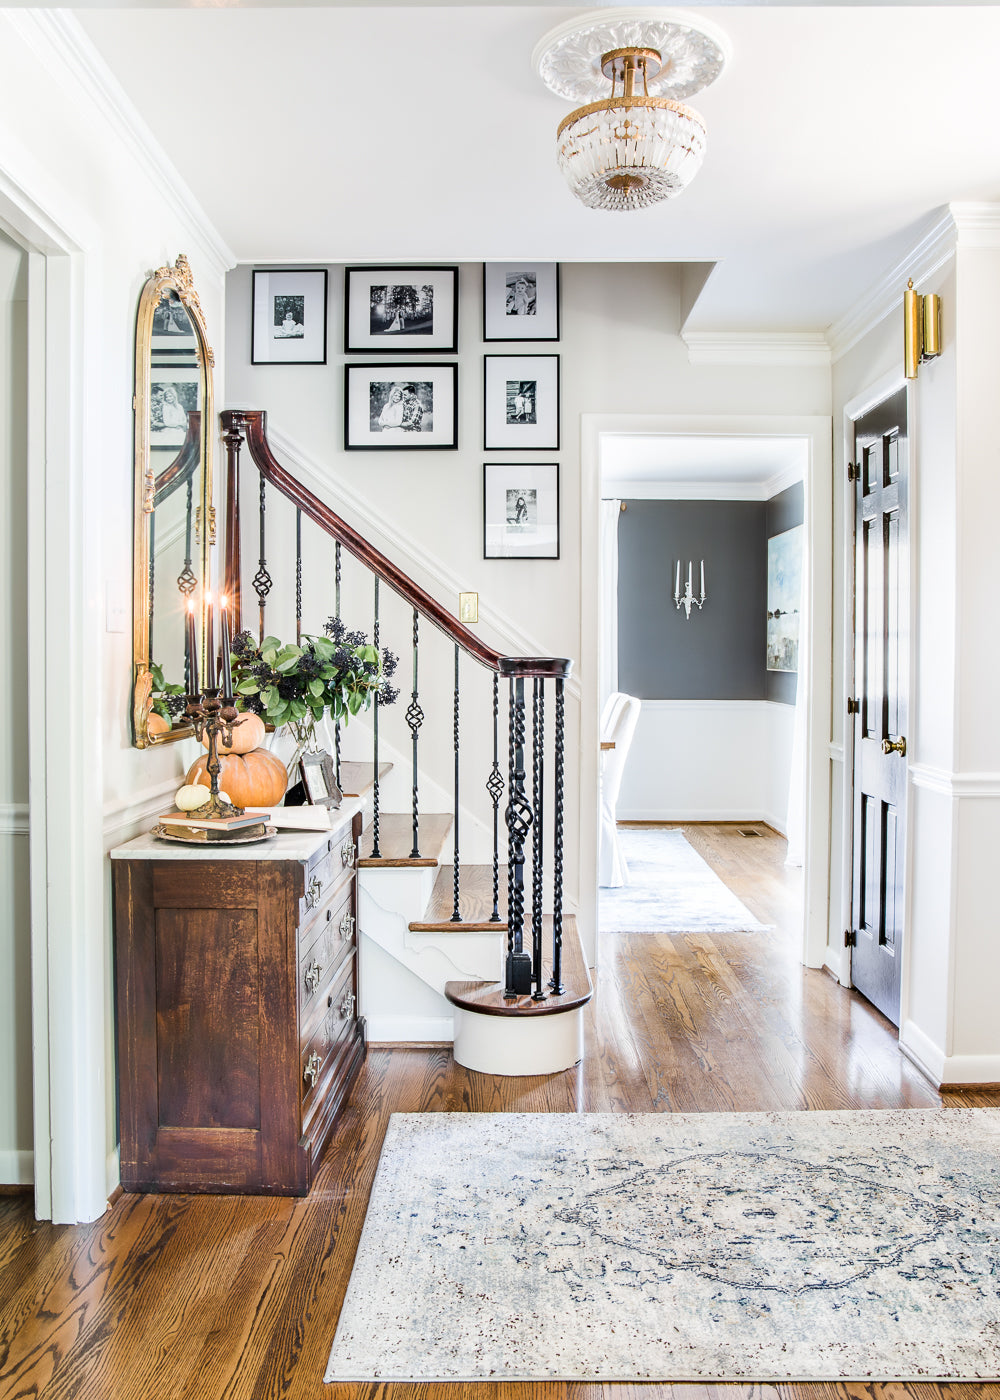 How we hung our stairway gallery wall quickly and easily without any accidental nail holes + inspiration for other gallery walls in the house